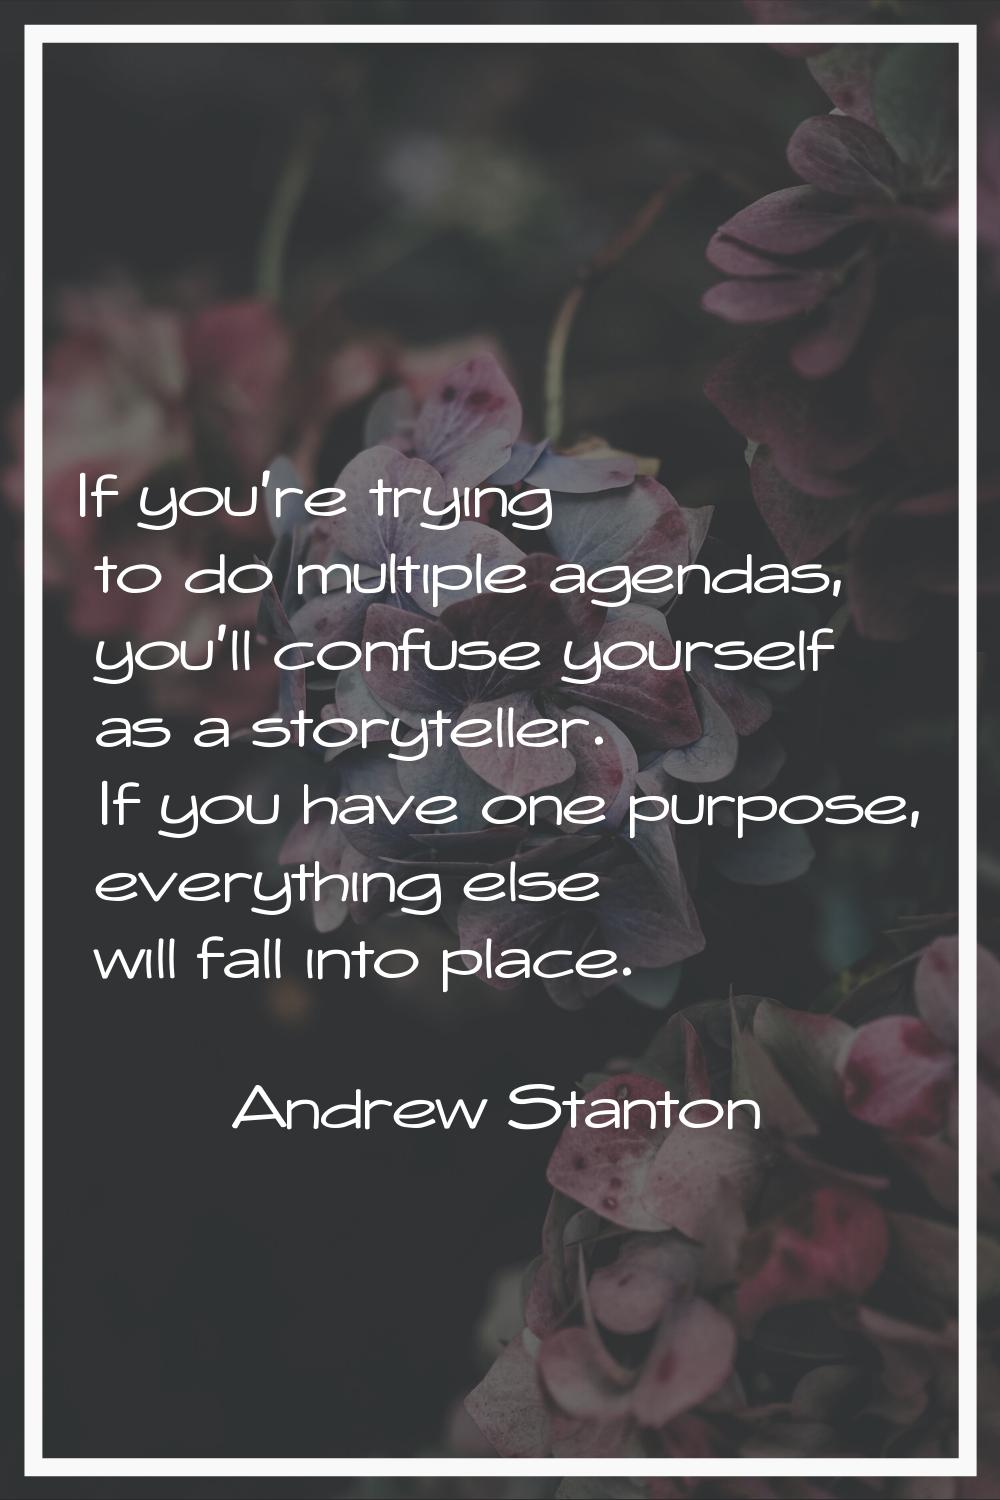 If you're trying to do multiple agendas, you'll confuse yourself as a storyteller. If you have one 